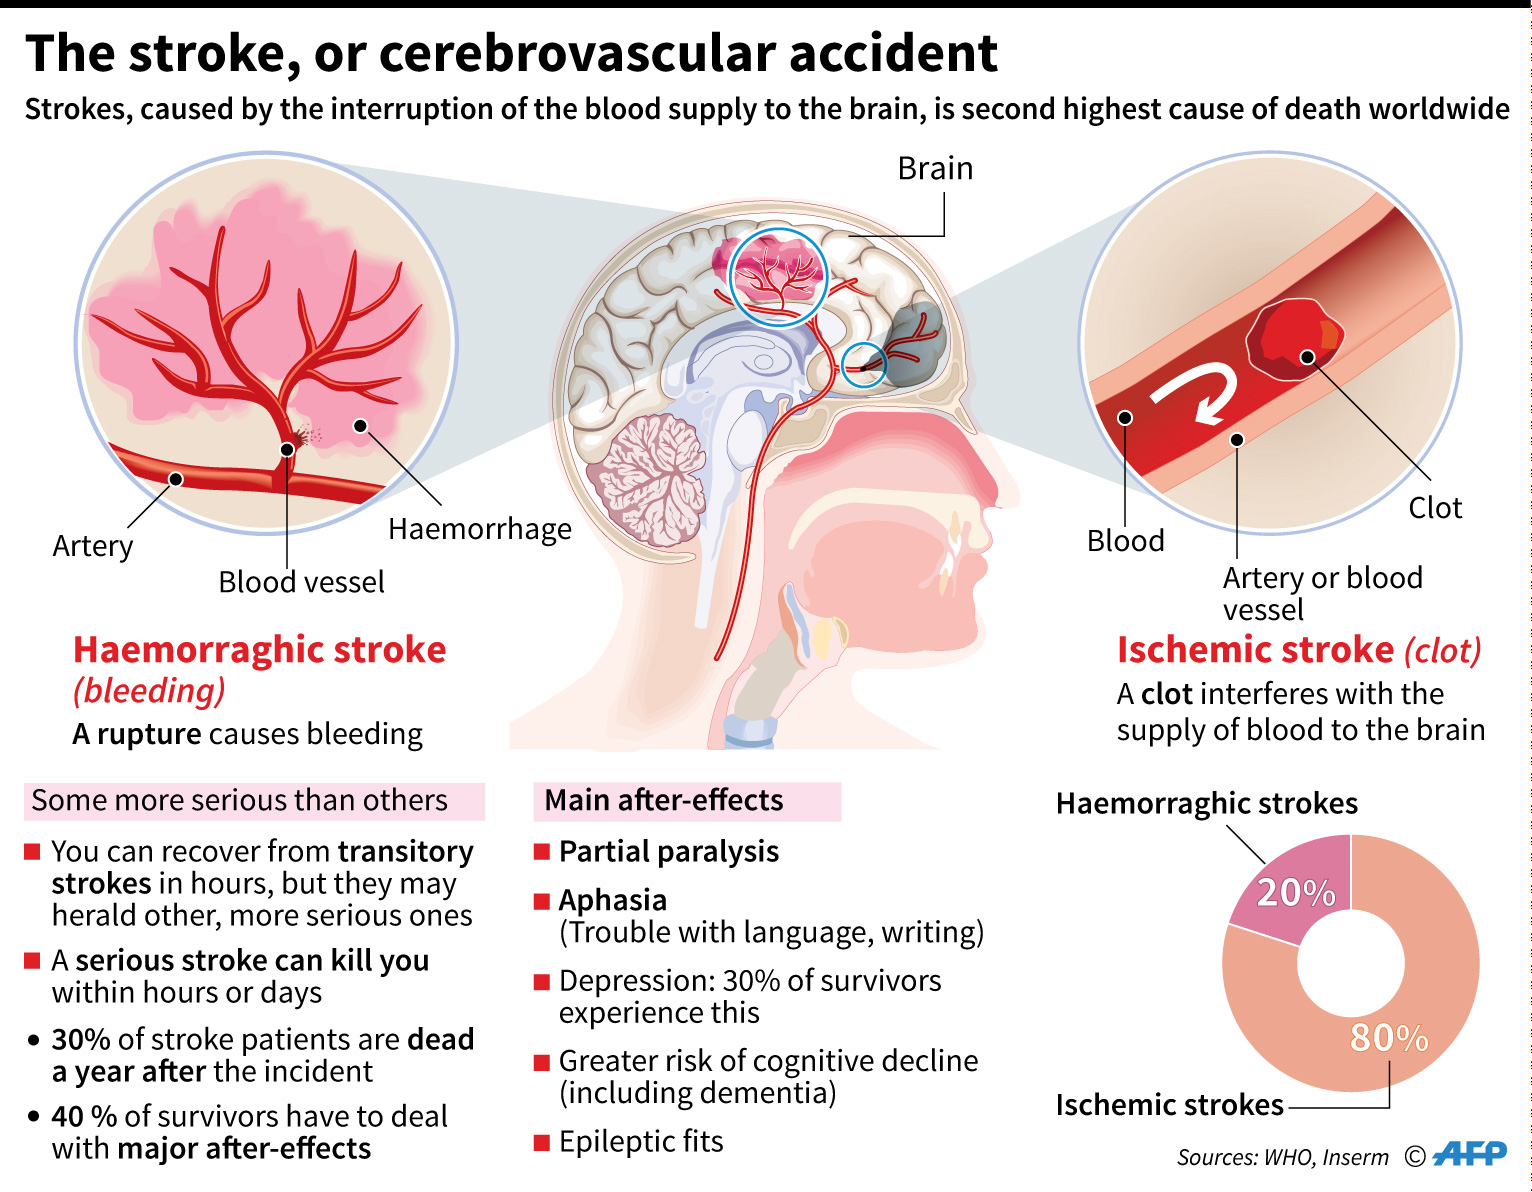 The stroke, or cerebrovascular accident